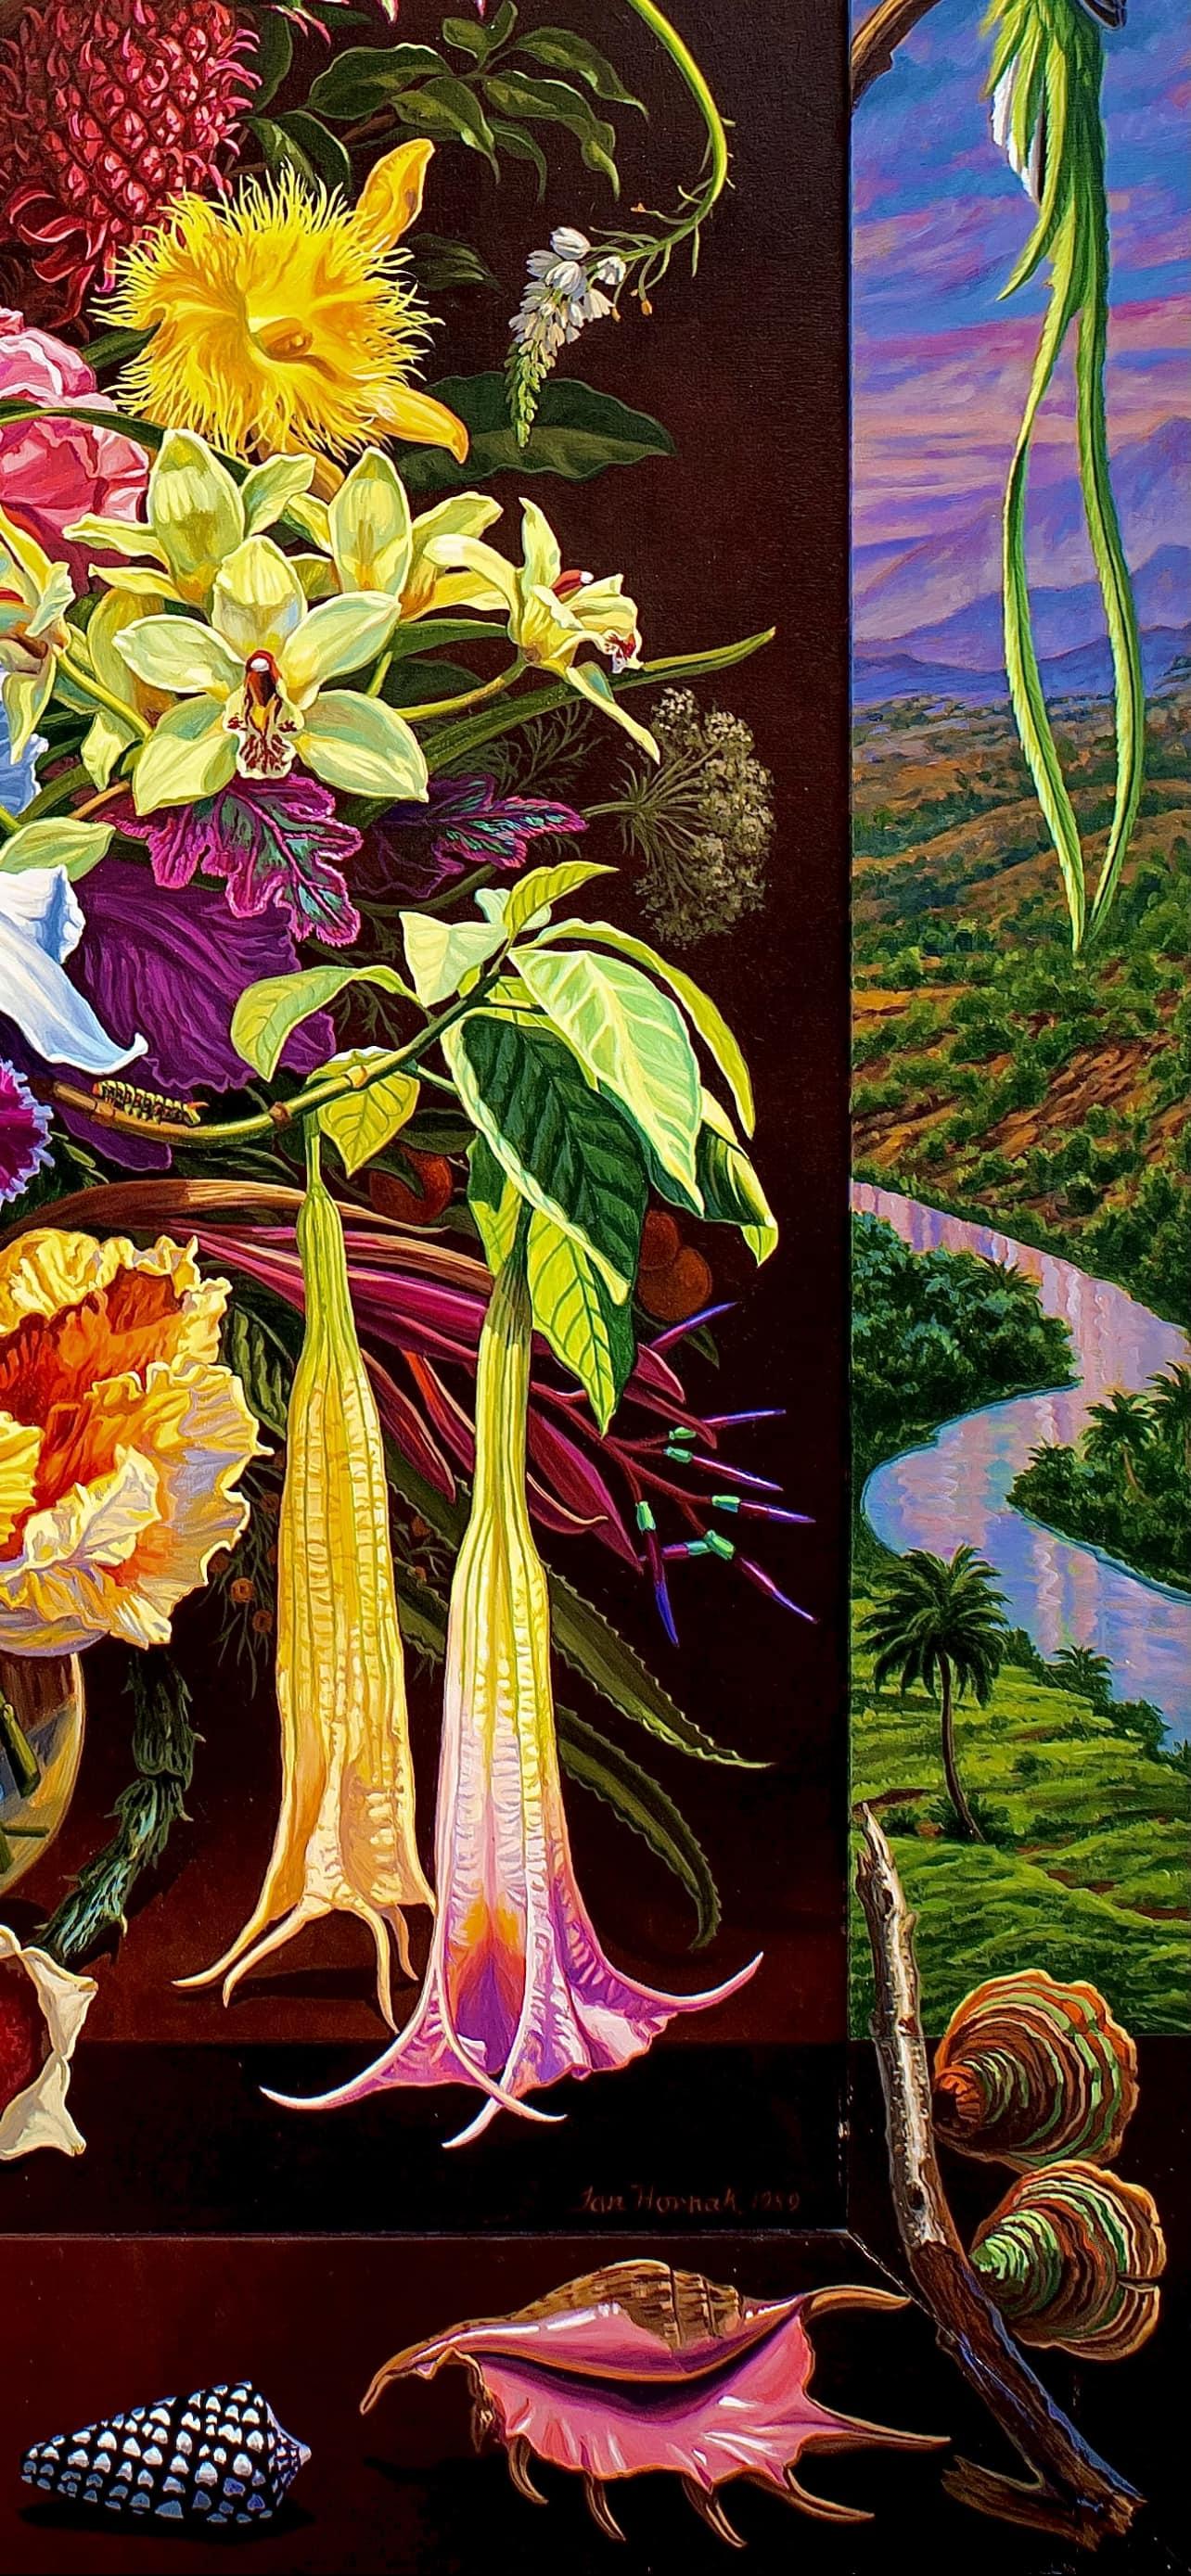 Artist: Ian Hornak (1944-2002)
Title: Bouquet of Tropical Flowers and Foliage
Year: 1989
Medium: Acrylic on Panel, with Artist Painted Frame
Size: 58.5 x 48.5 inches
Condition: Excellent
Inscription: Signed, dated, and titled by the